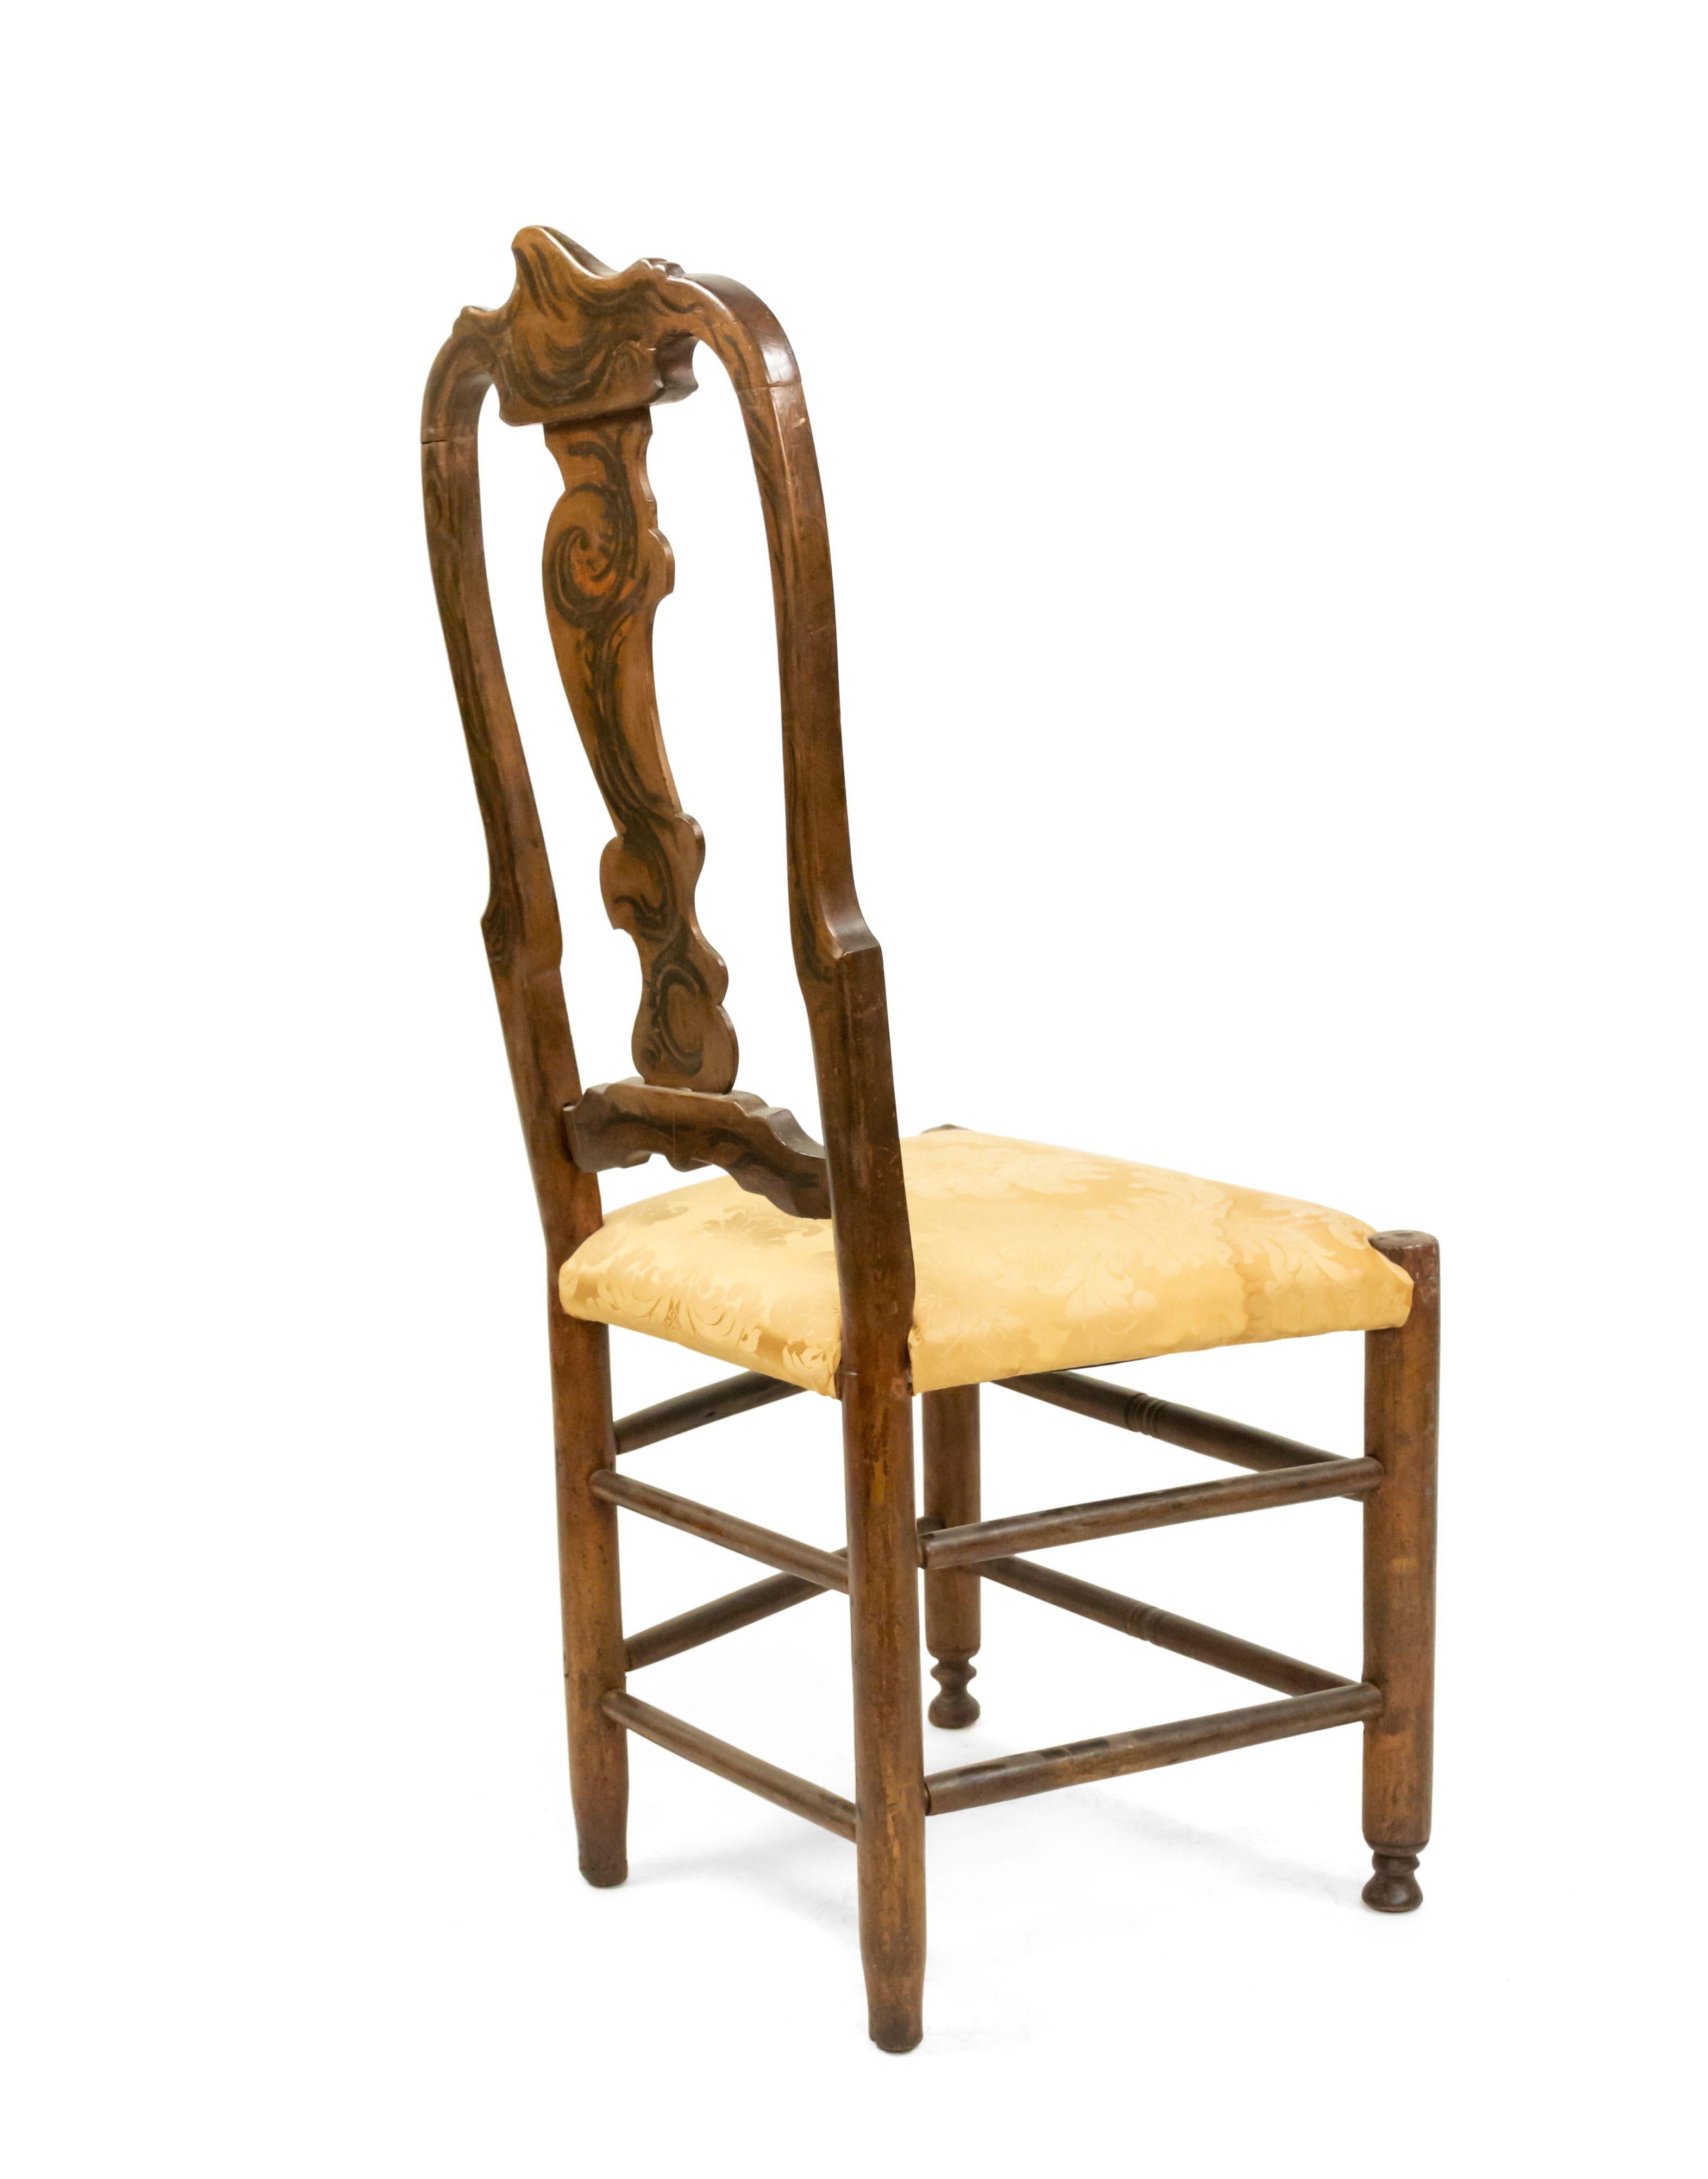 Pair of 18th-19th century Italian Venetian style painted splat back side chairs with stretcher and upholstered seat.